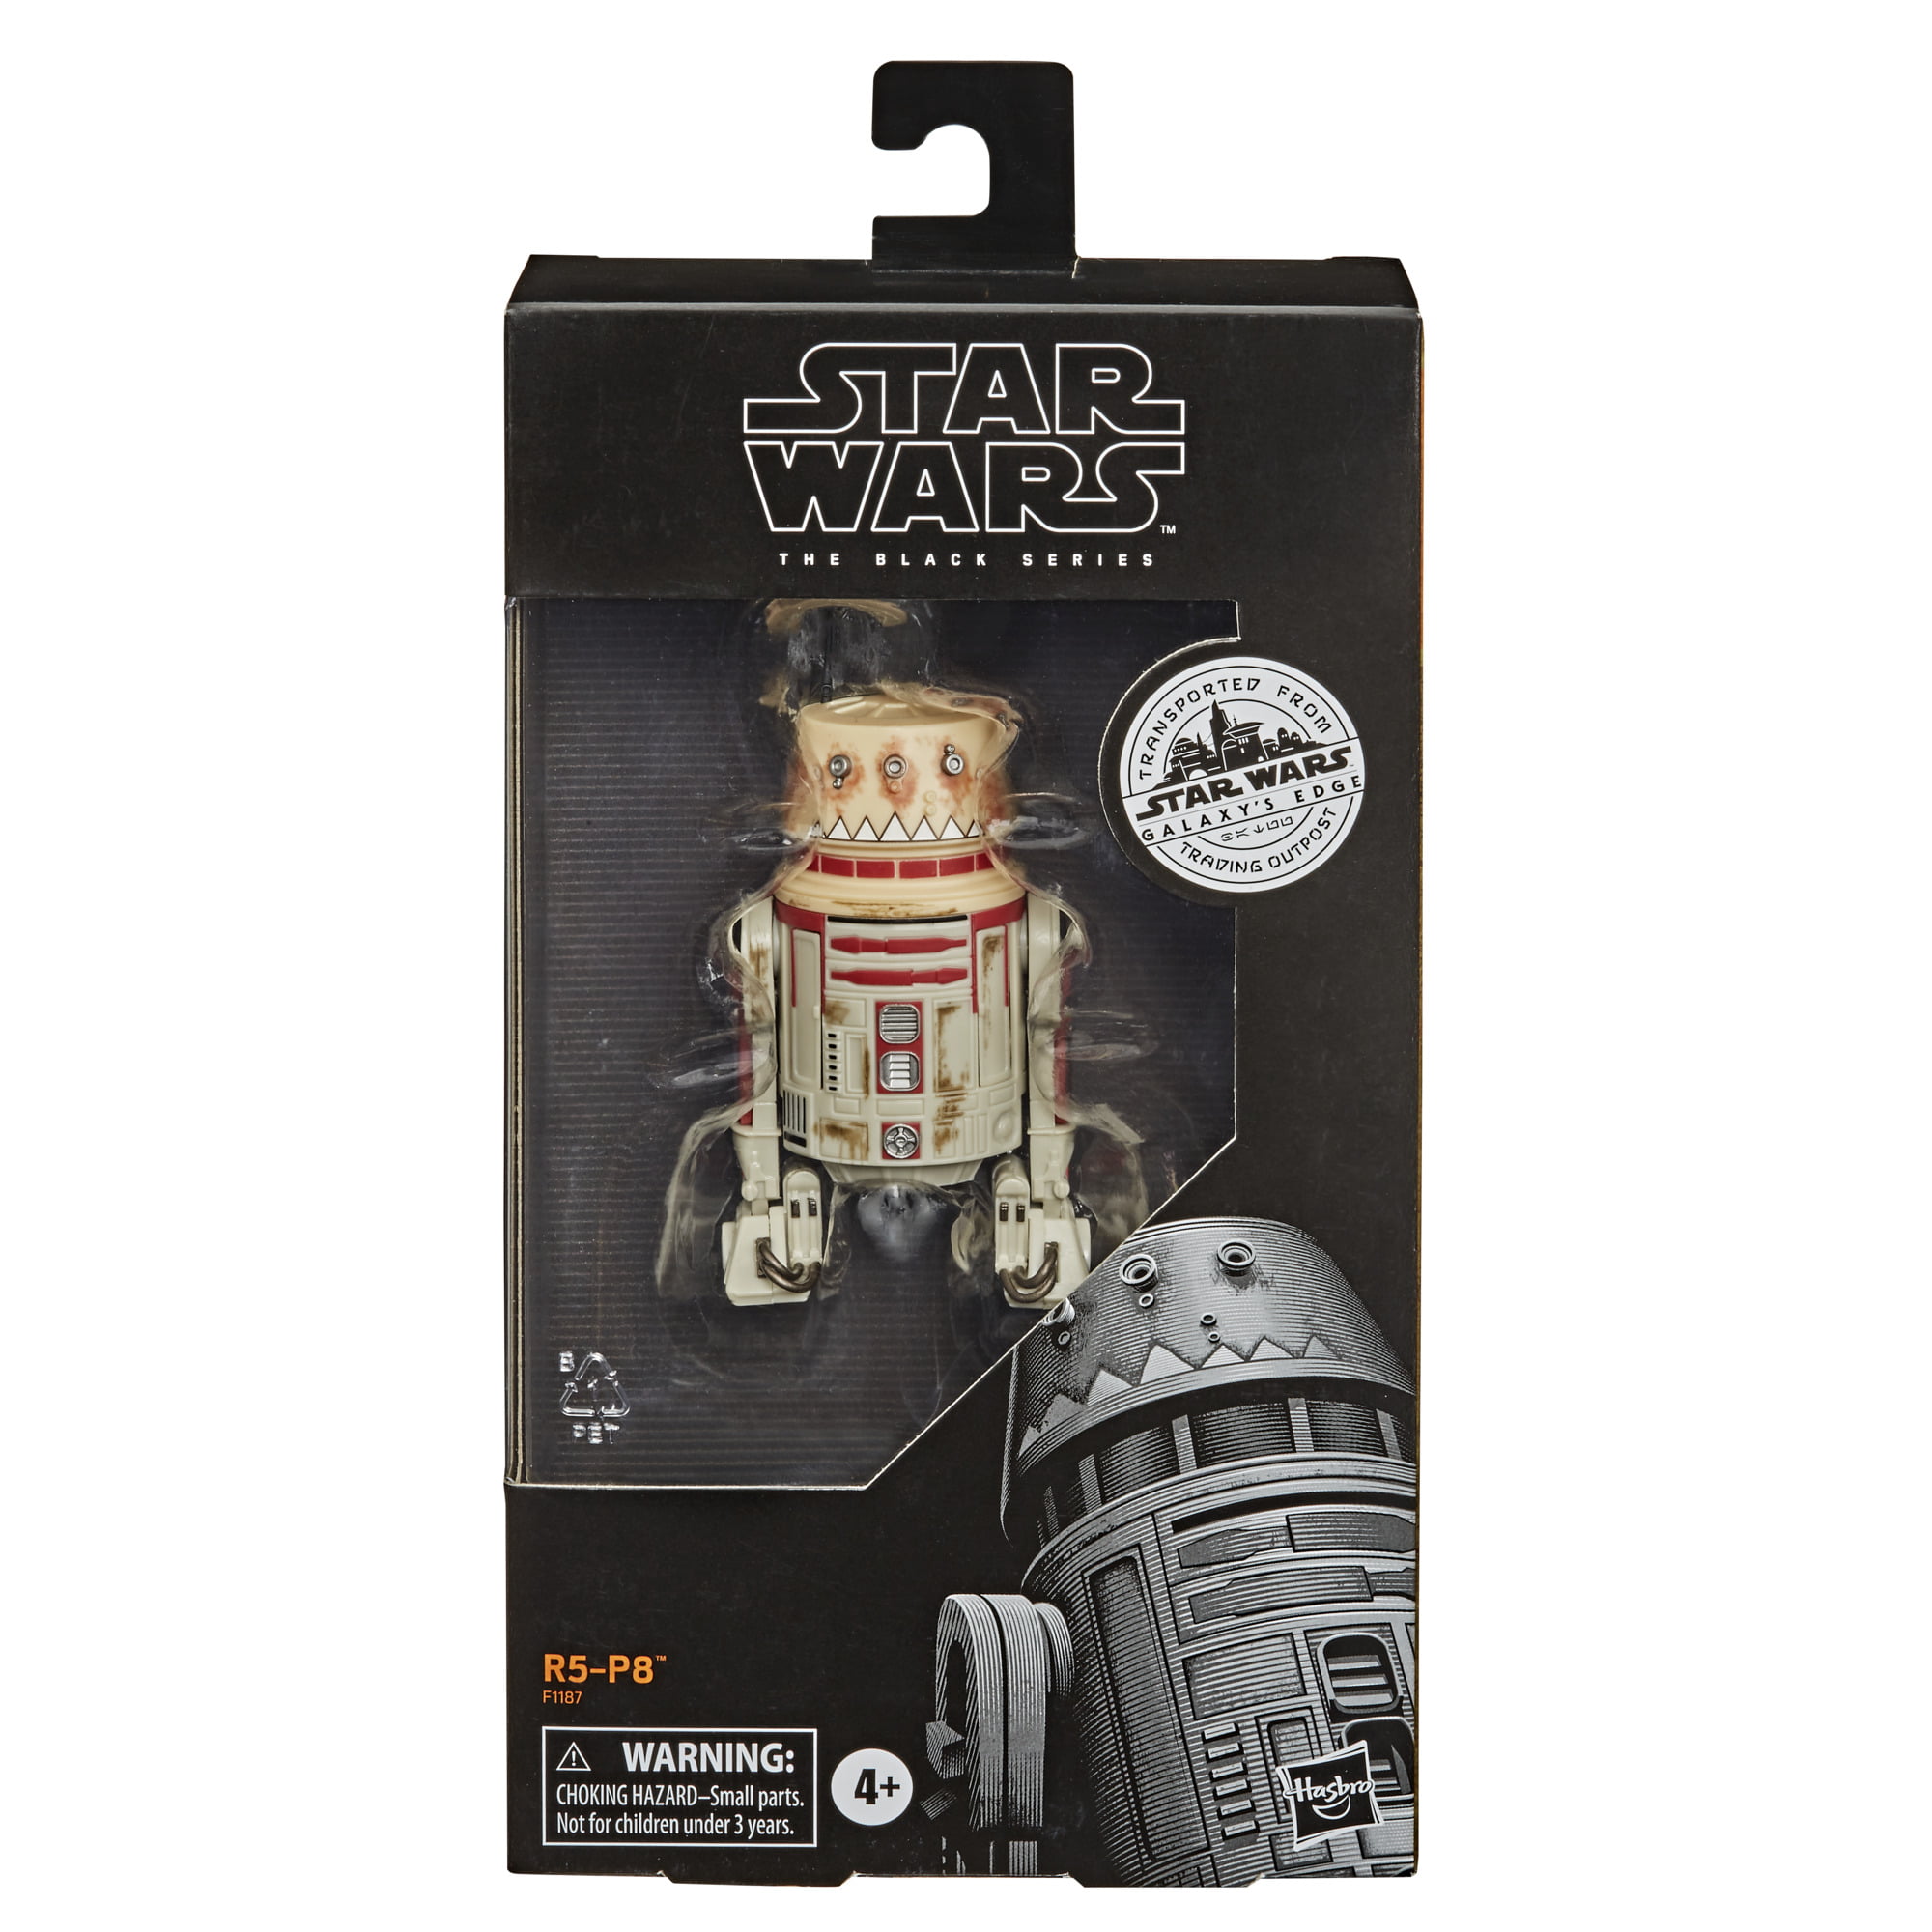 Star Wars The Series R5-P8 Toy 6-Inch Scale Star Wars Galaxy's Edge Figure, Toys for Kids Ages and Up - Walmart.com